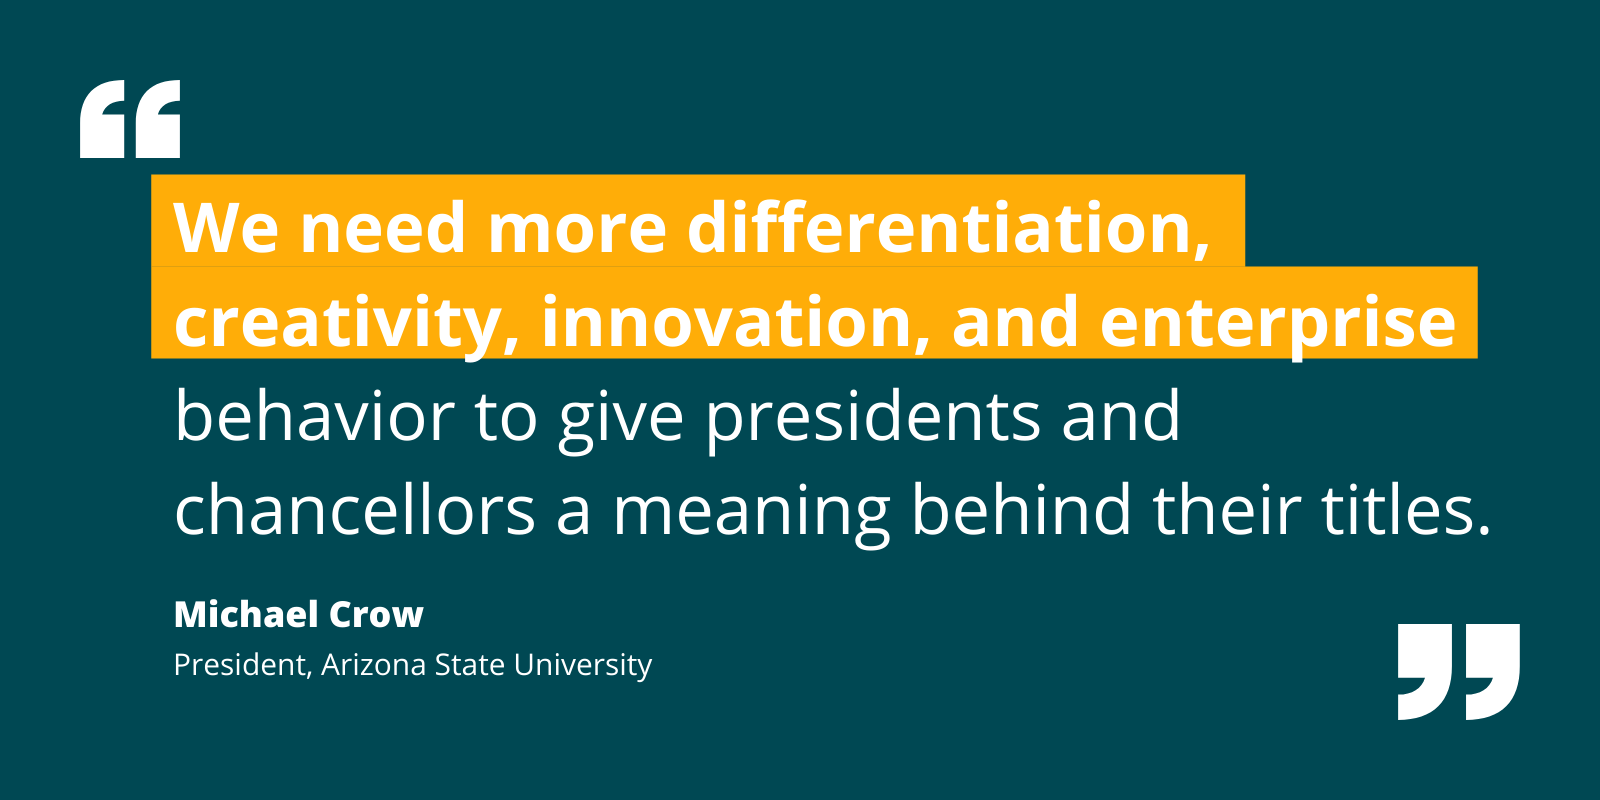 Quote by Michael Crow re higher ed leaders fitting their titles via more creativity, innovation, and enterprise behavior.